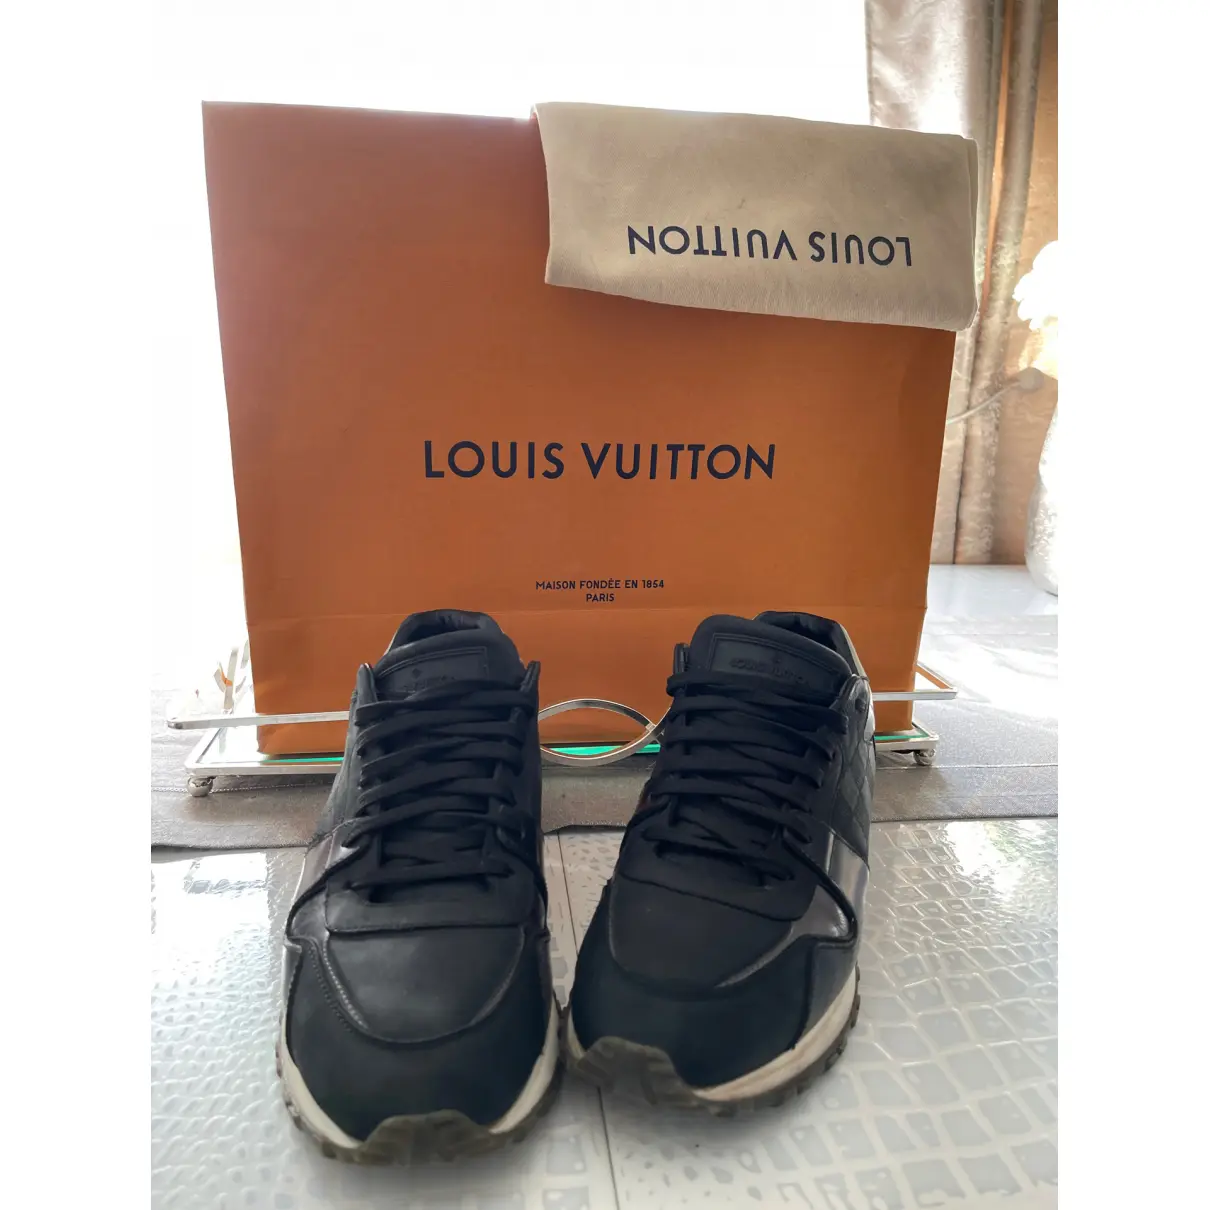 Buy Louis Vuitton Run Away leather low trainers online